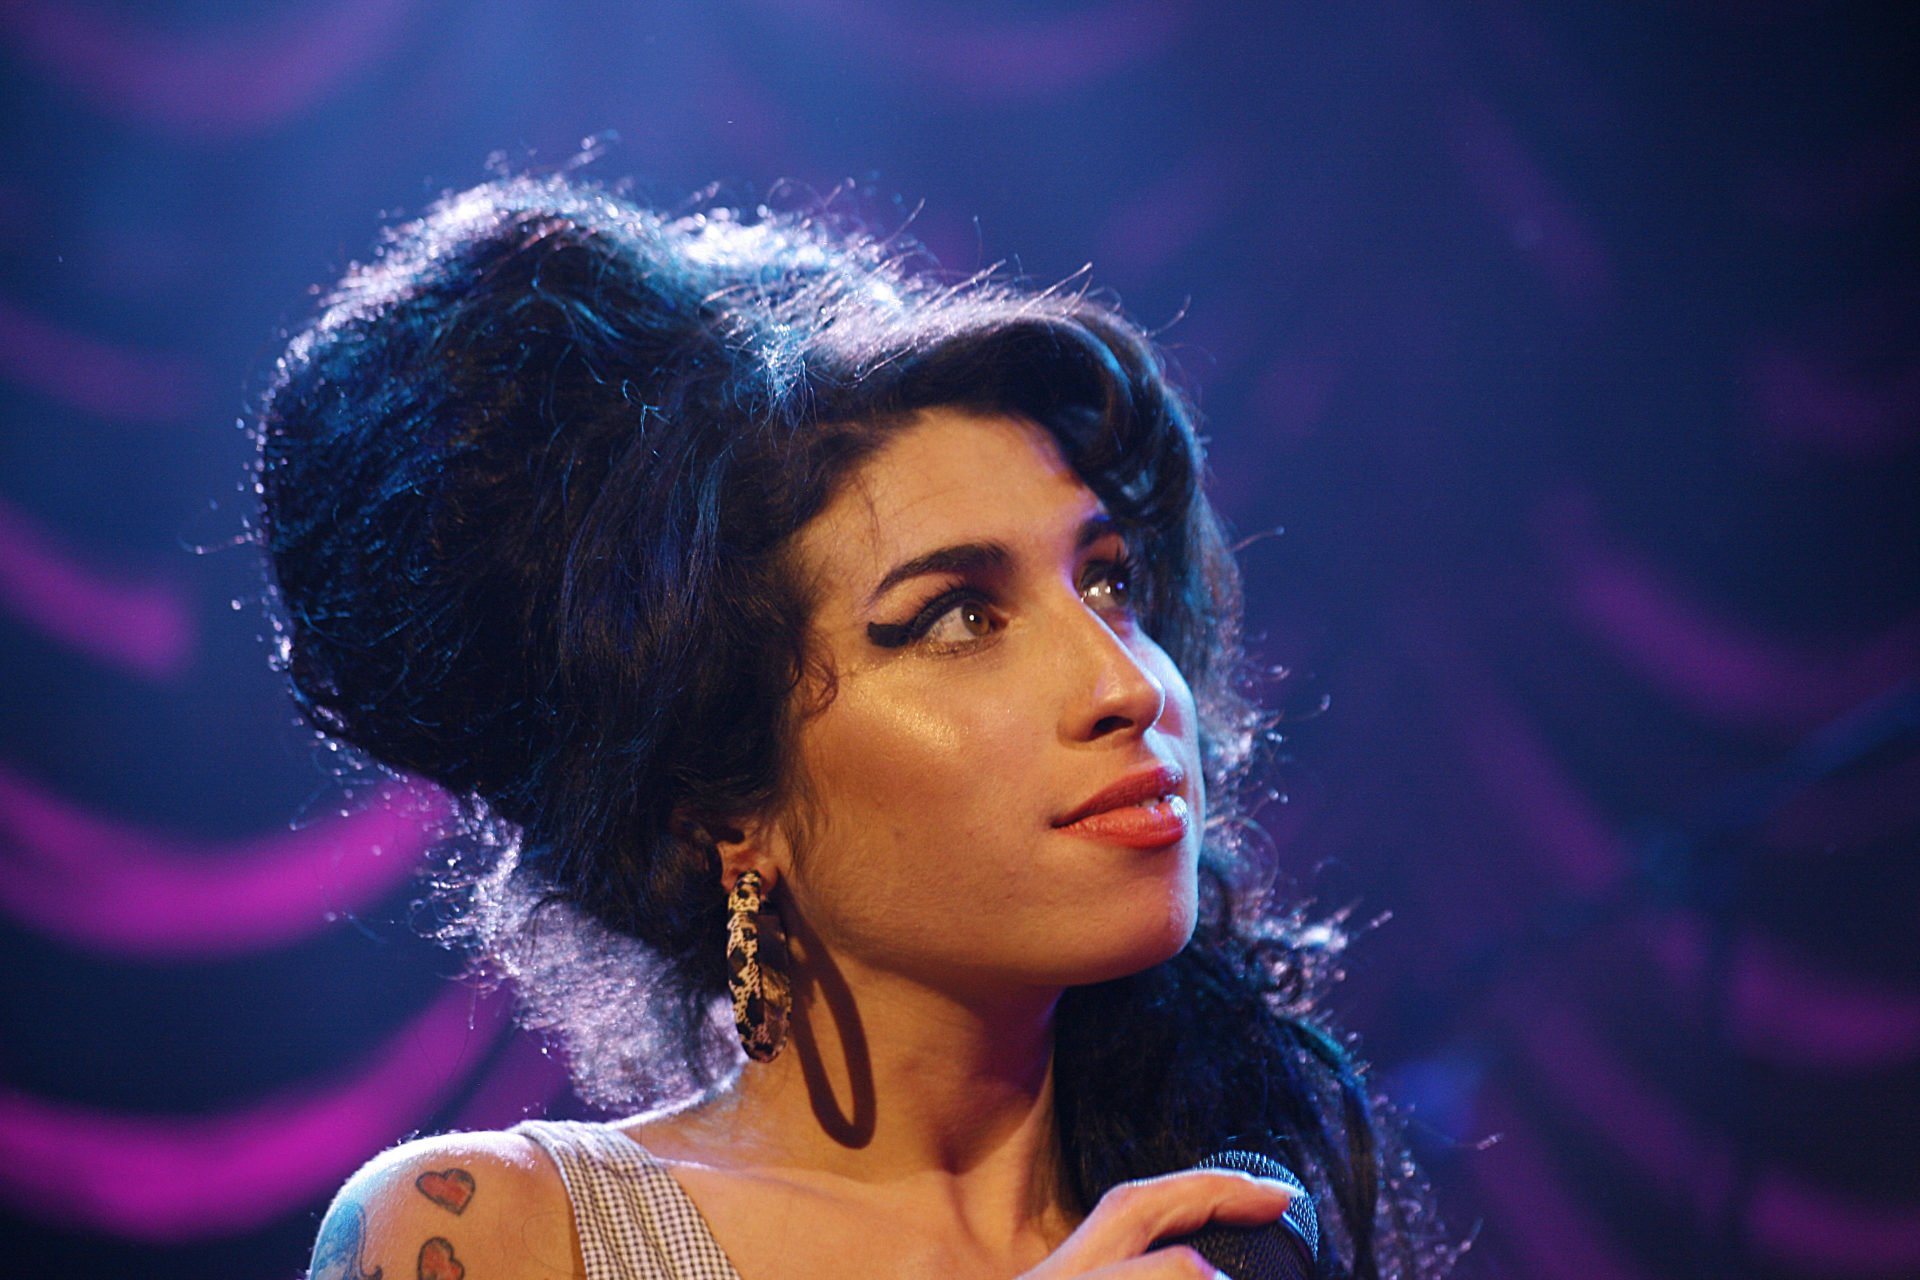 Amy Winehouse’s favourite song helped inspire singer to wear her heart on her sleeve